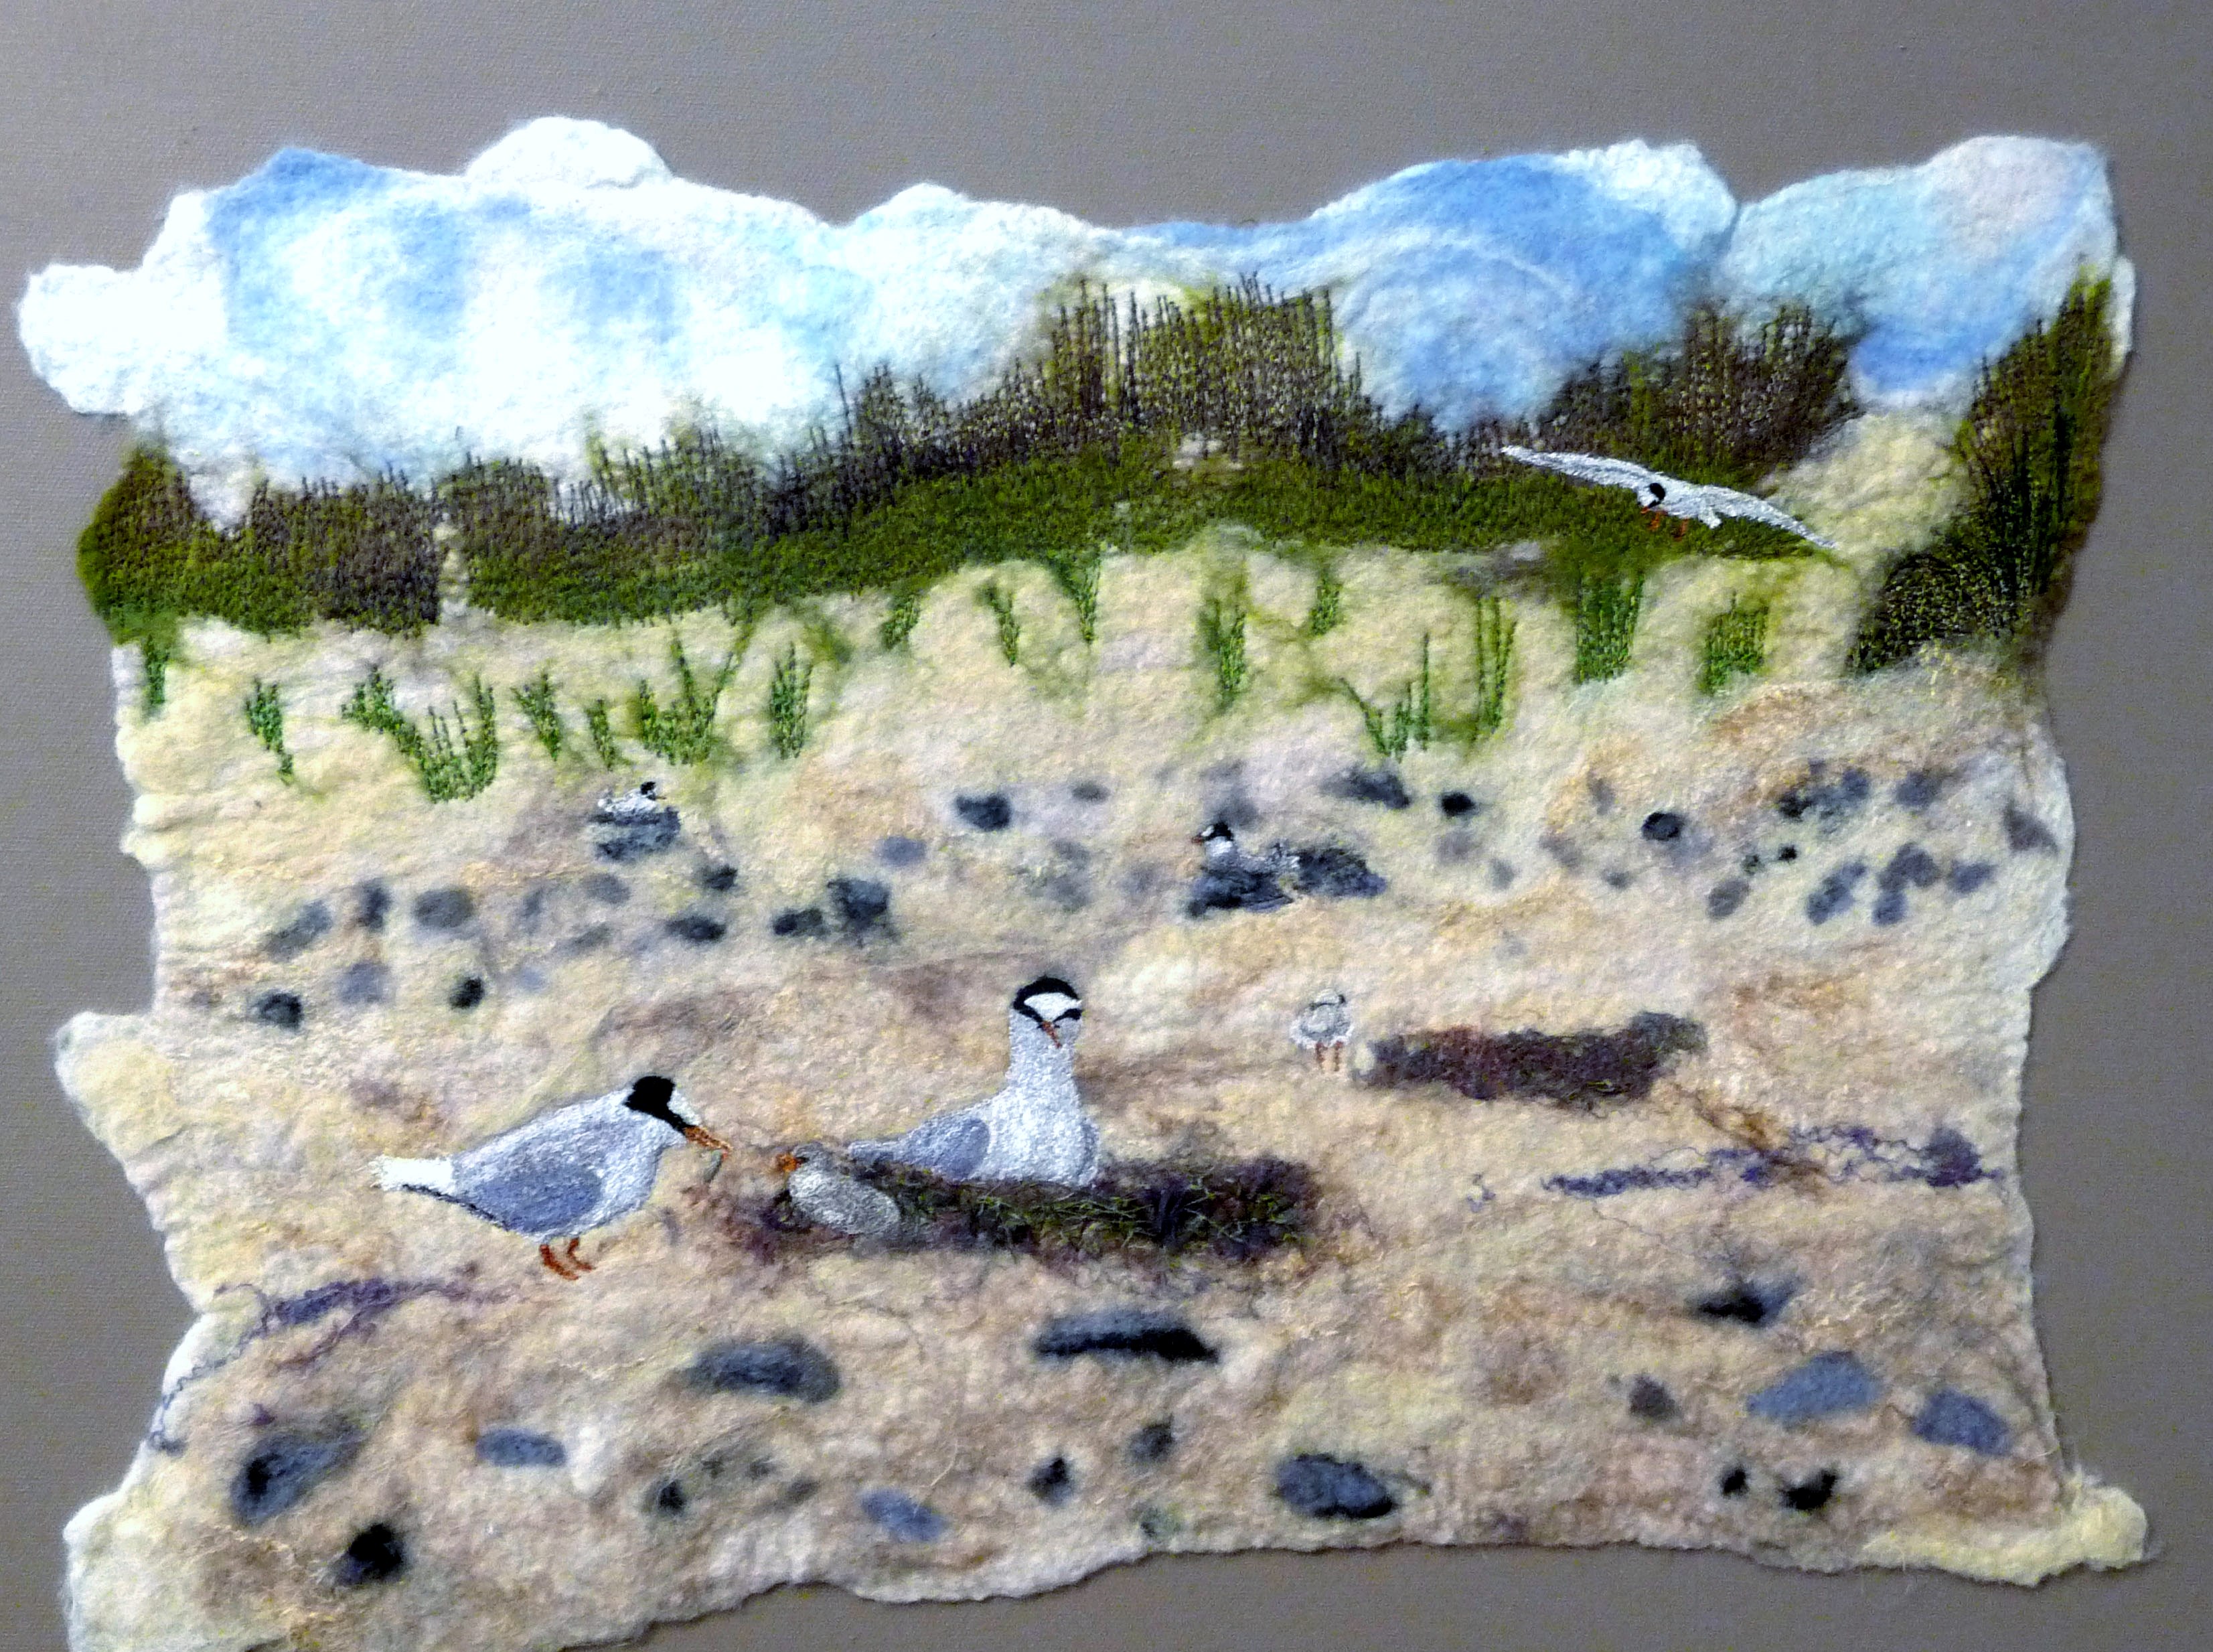 LITTLE TERNS AT GRONANT SAND by Suzanne Owen